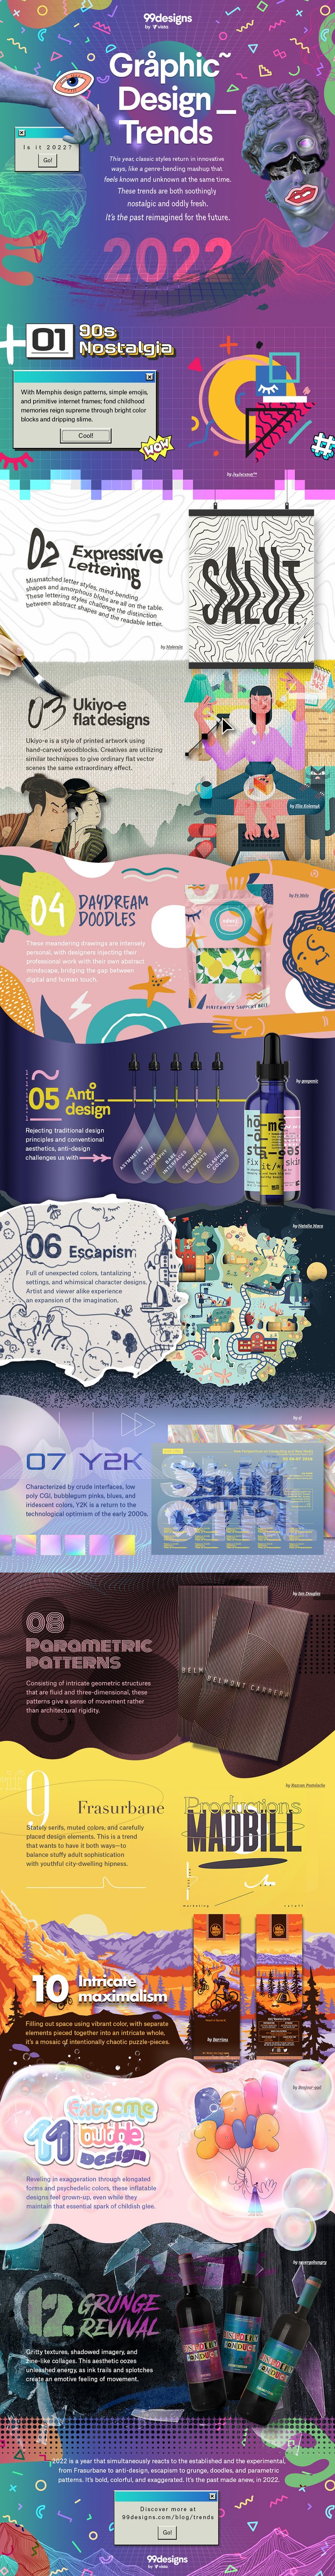 Exciting Graphic Design Trends to Look for in 2022 [INFOGRAPHIC ...